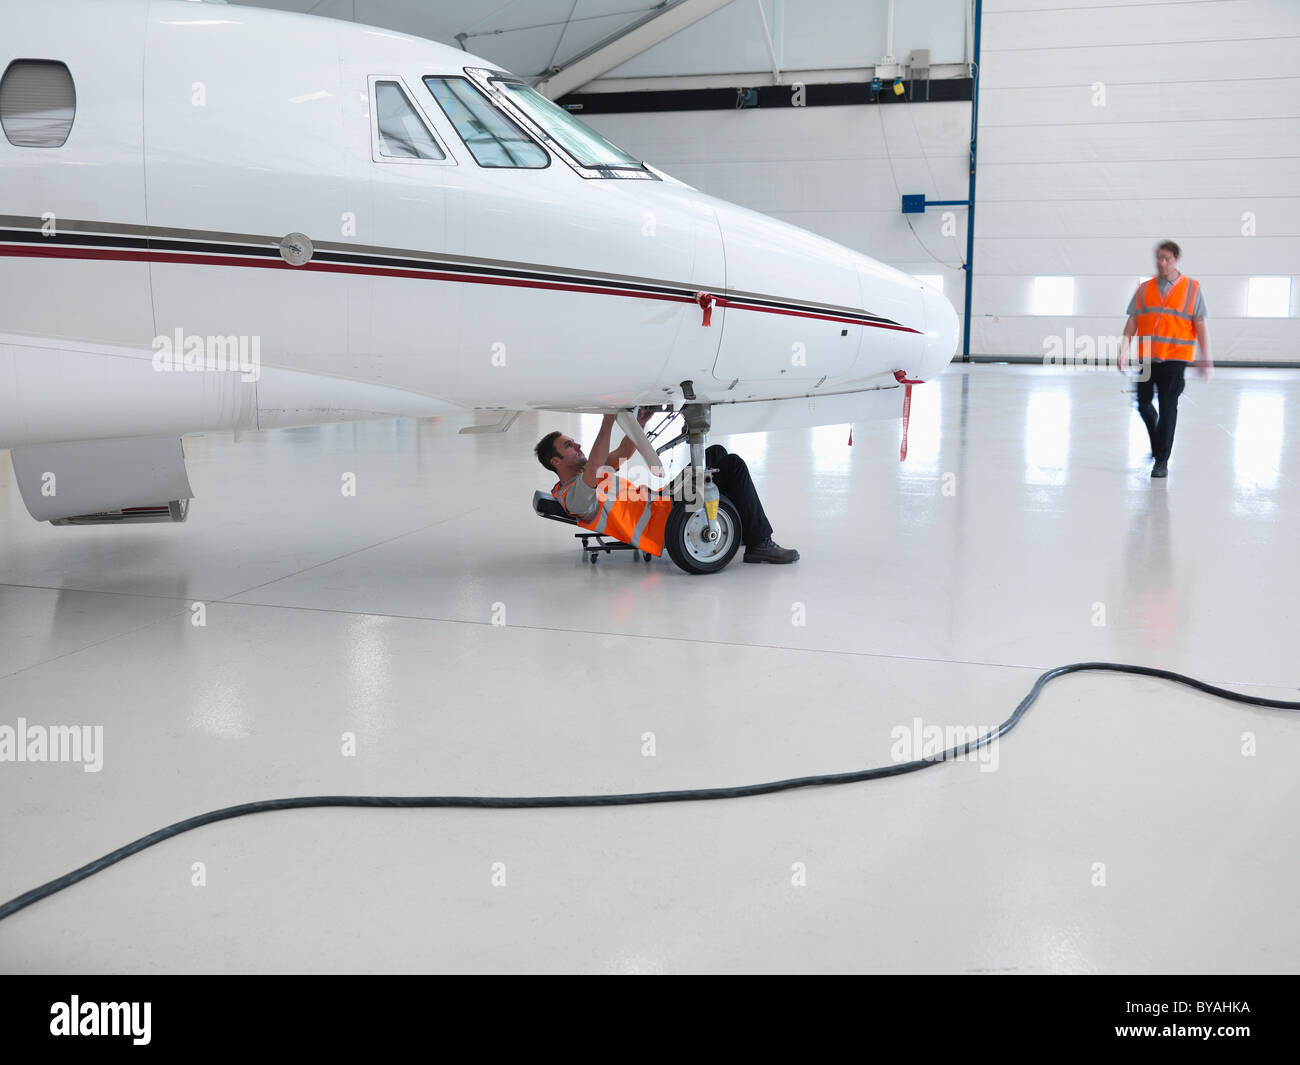 Engineers working on jet aircraft Stock Photo